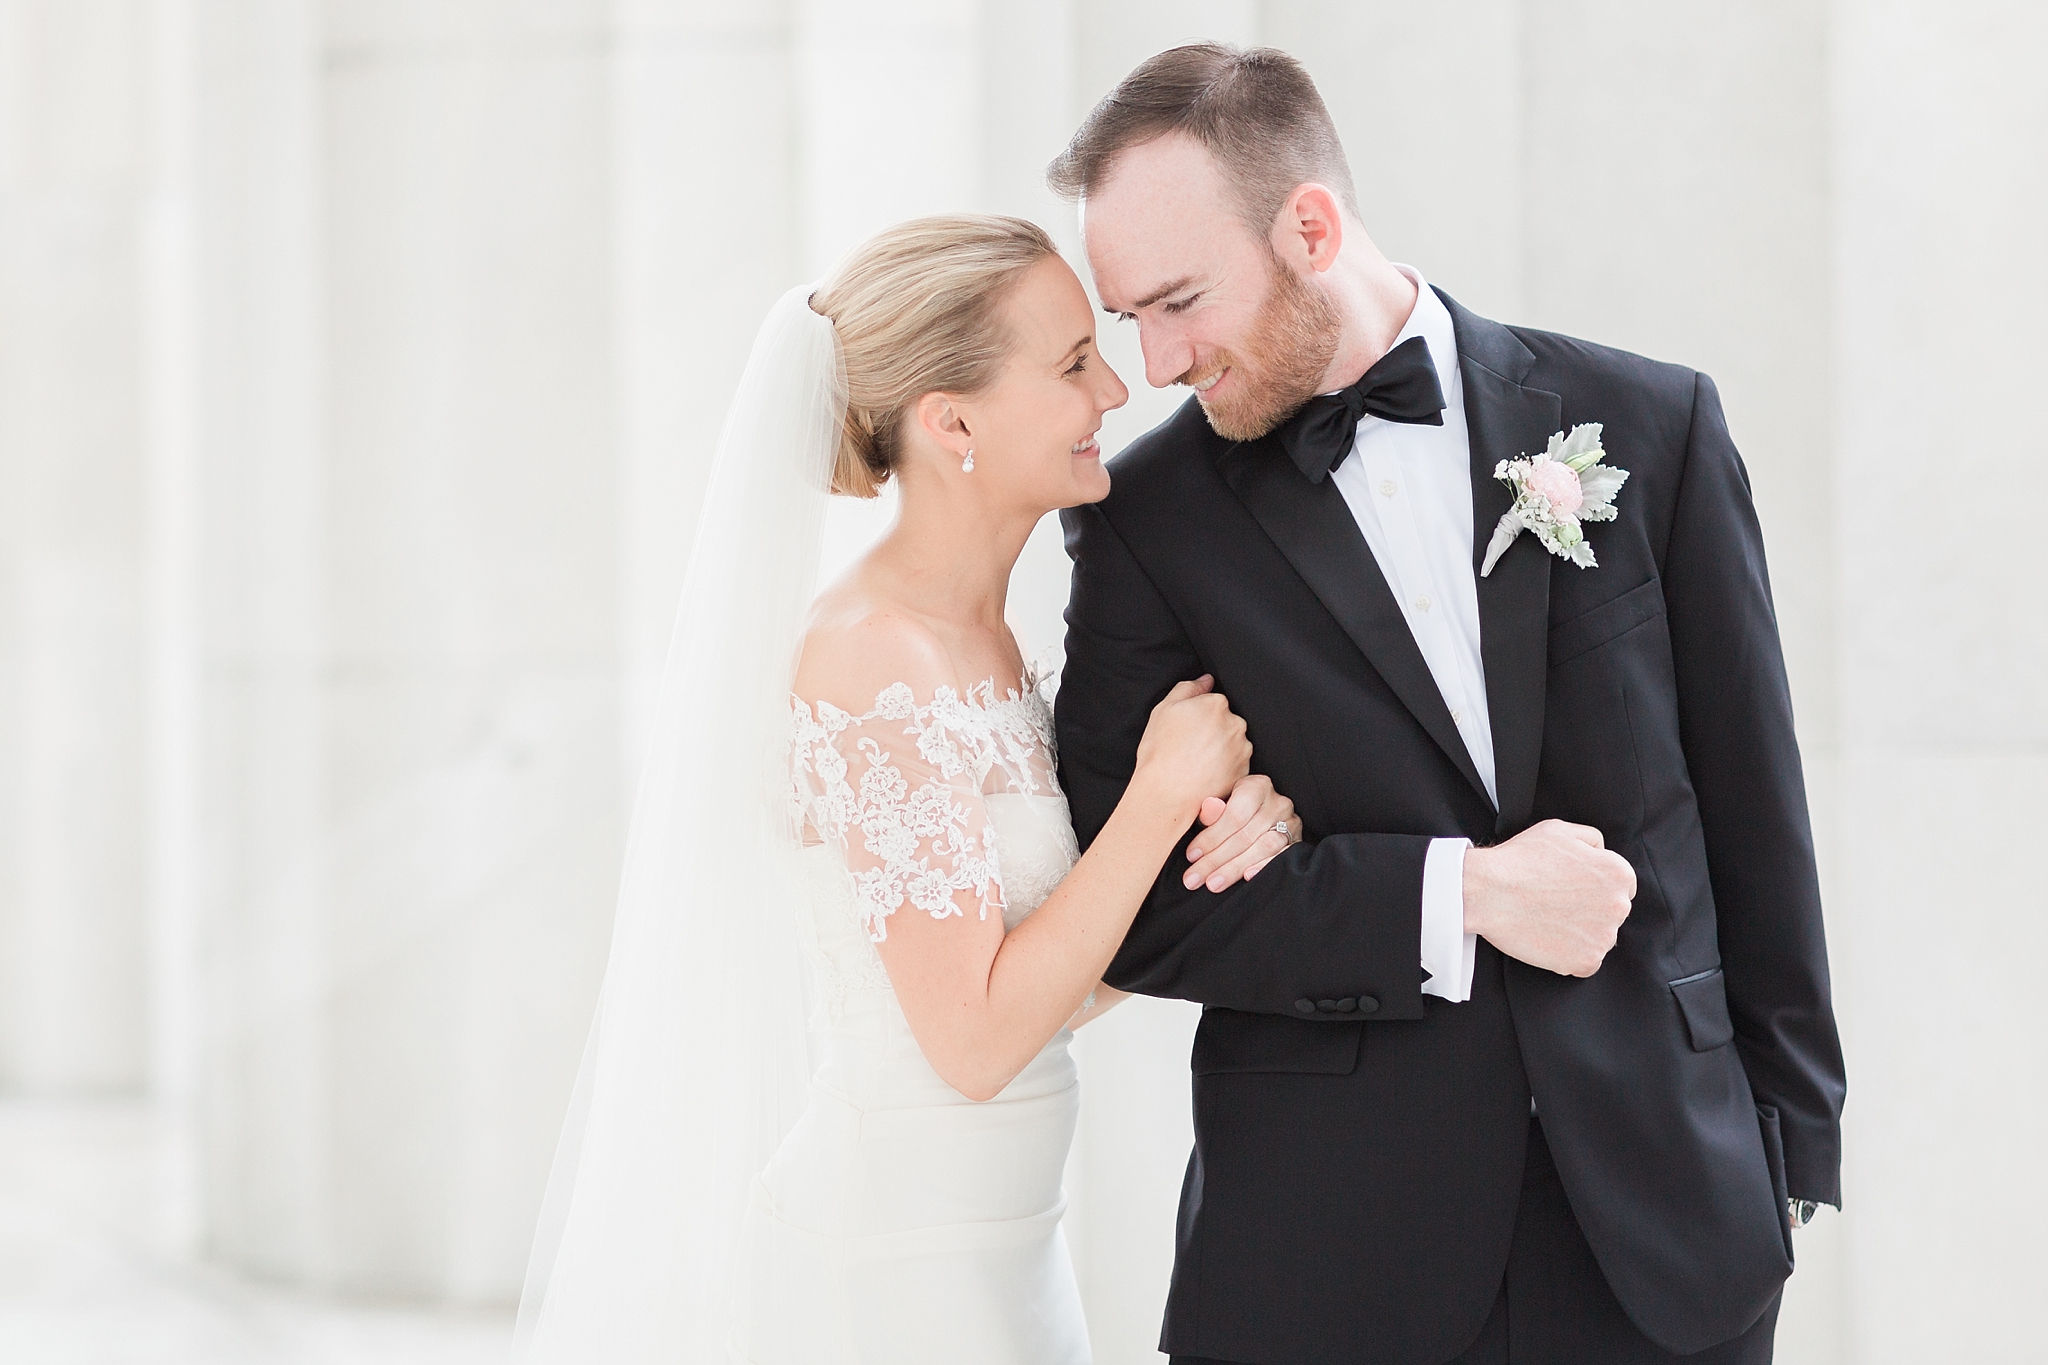 Don't want to blend in with your white dress but scared of a spray tan? Fear not! Here are 10 tips from a Washington, DC wedding photographer for the perfect glow. 